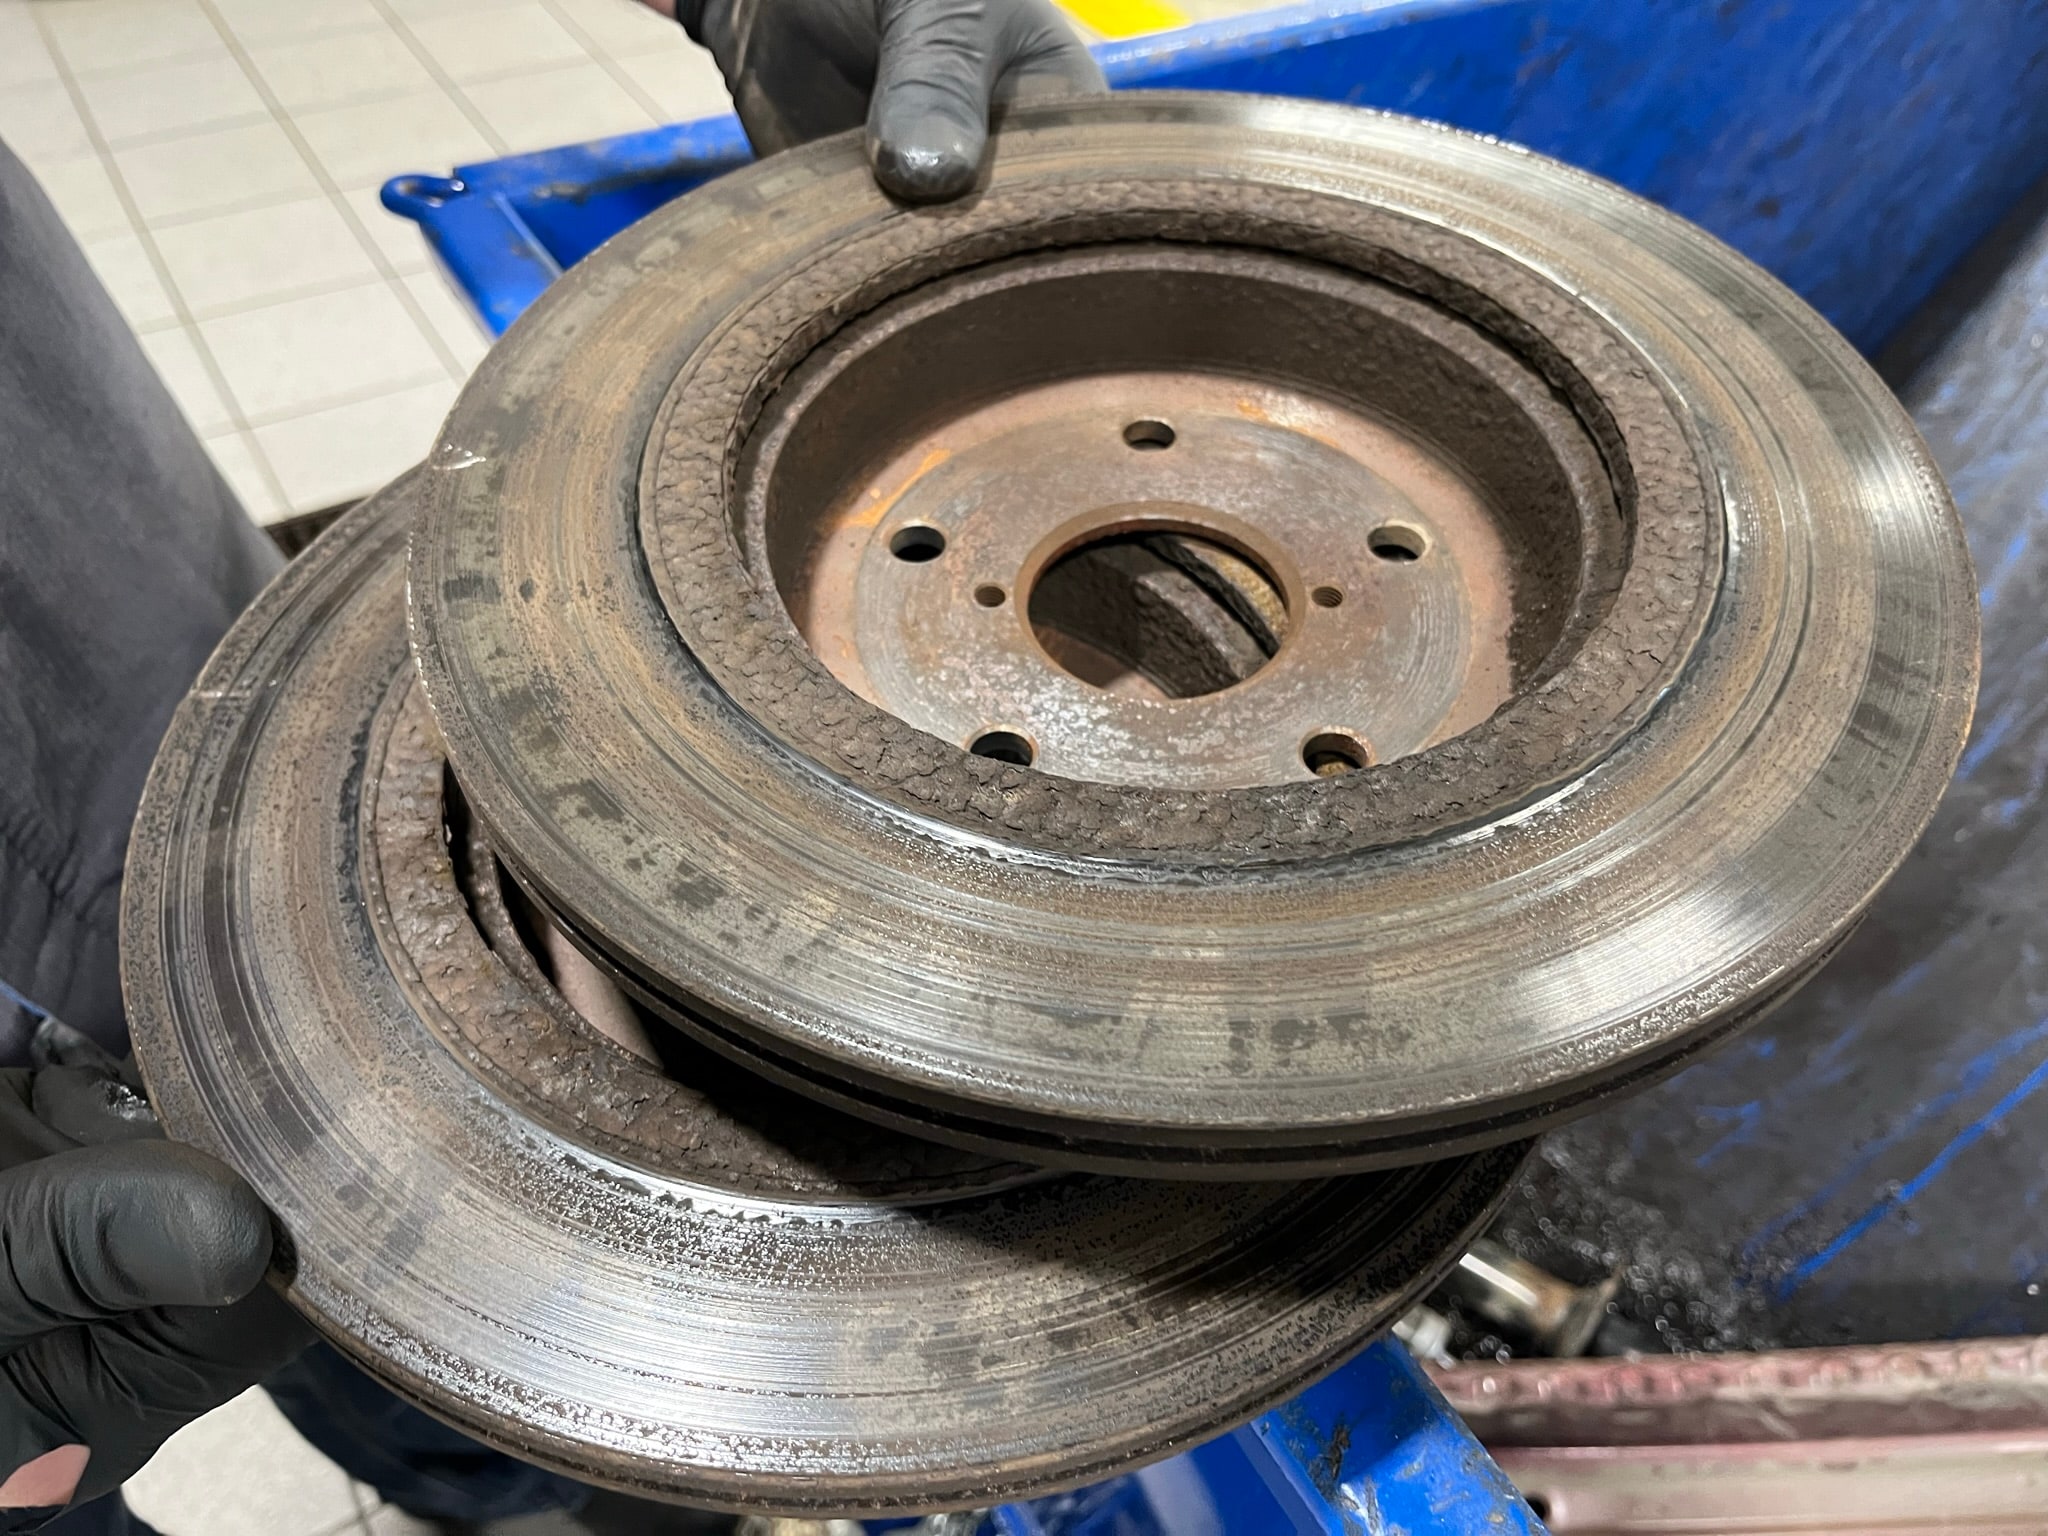 Brake Disc replacement parts service can be done at Subaru